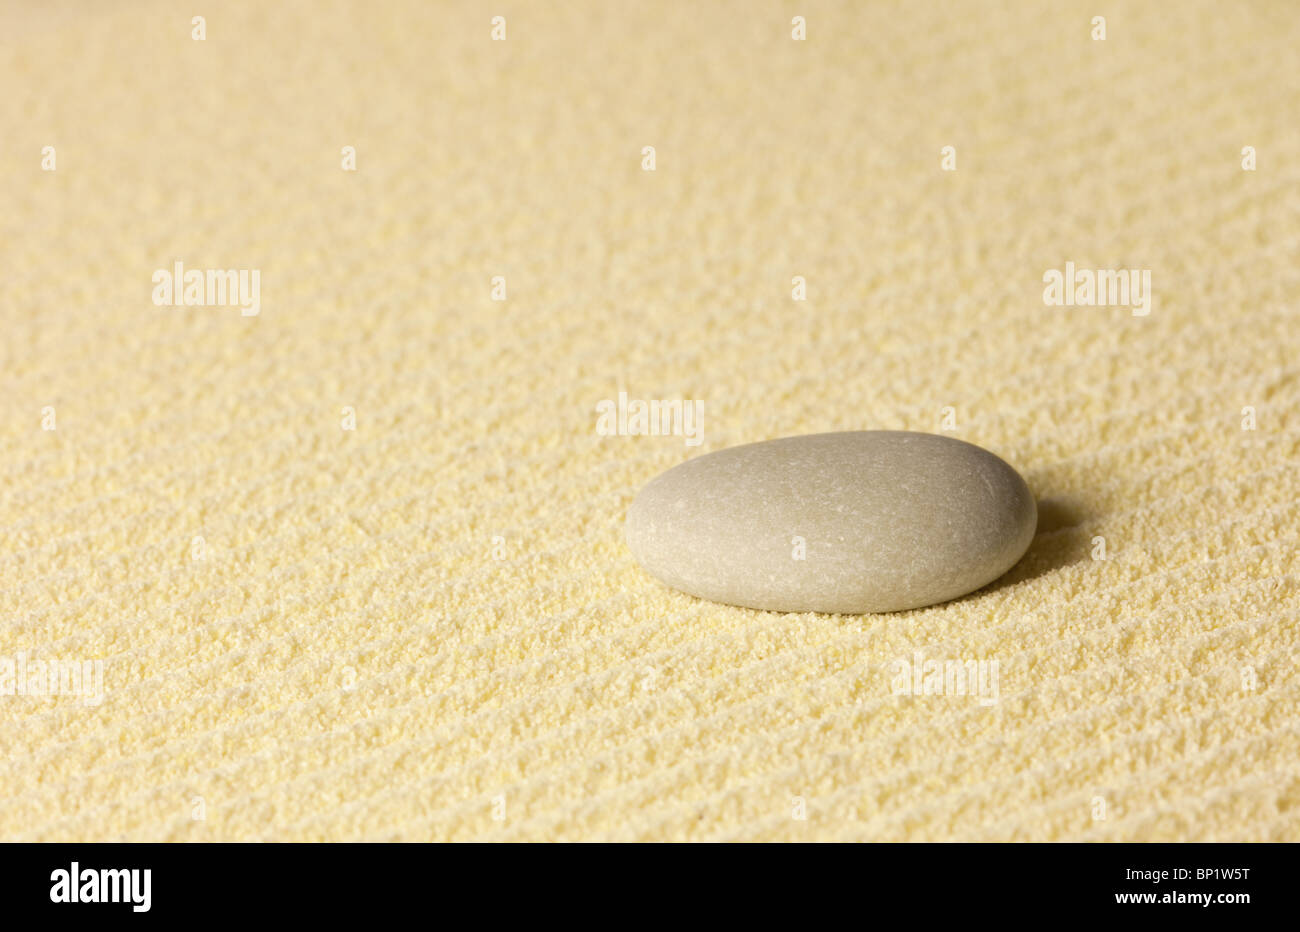 Element of a Japanese rock-garden - a small stone on sand Stock Photo